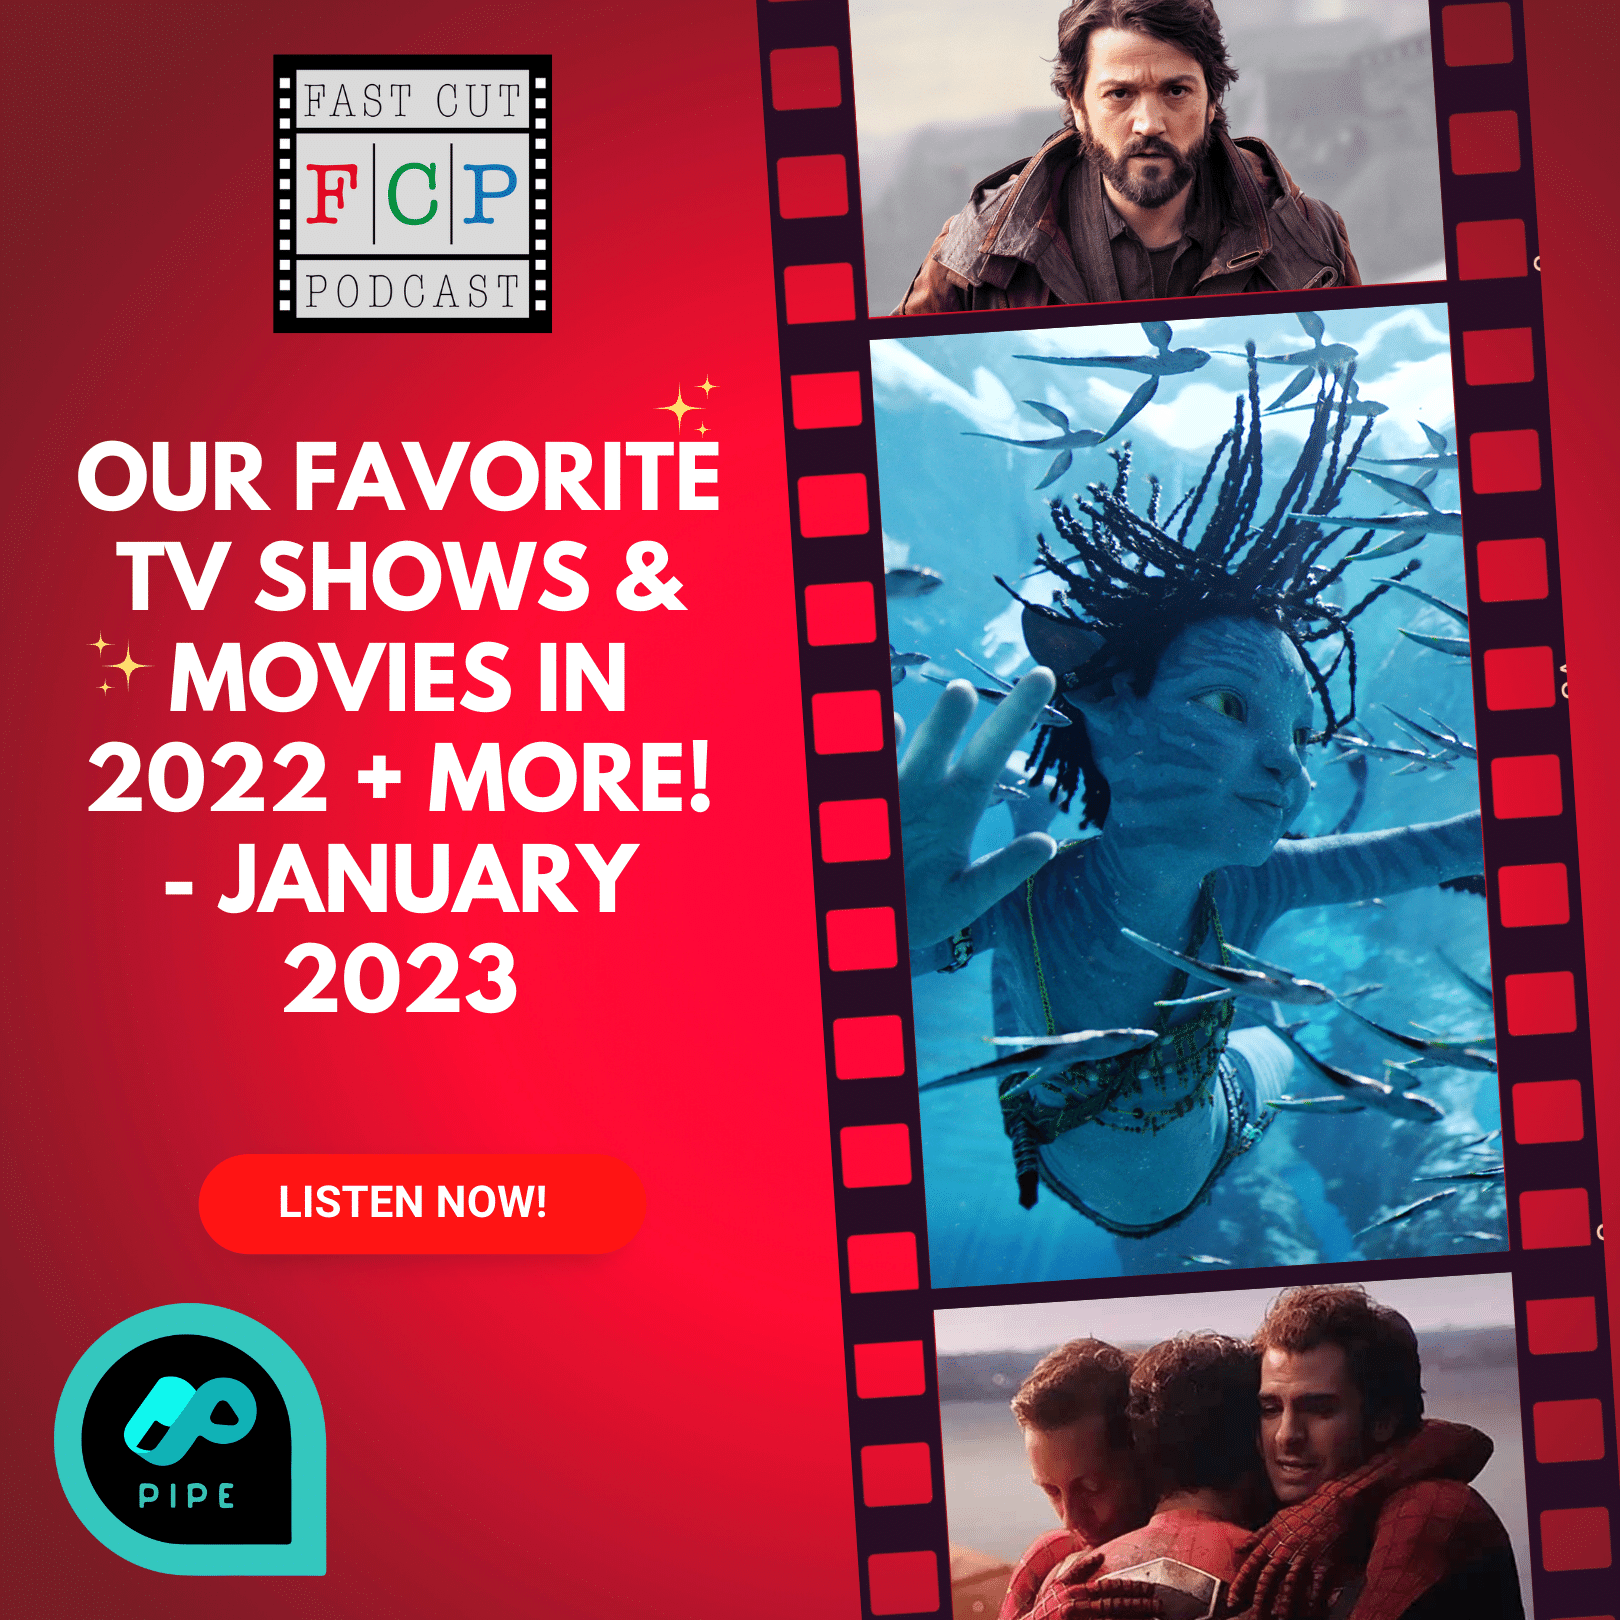 Our favorite TV Shows & Movies in 2022 + more! - January 2023